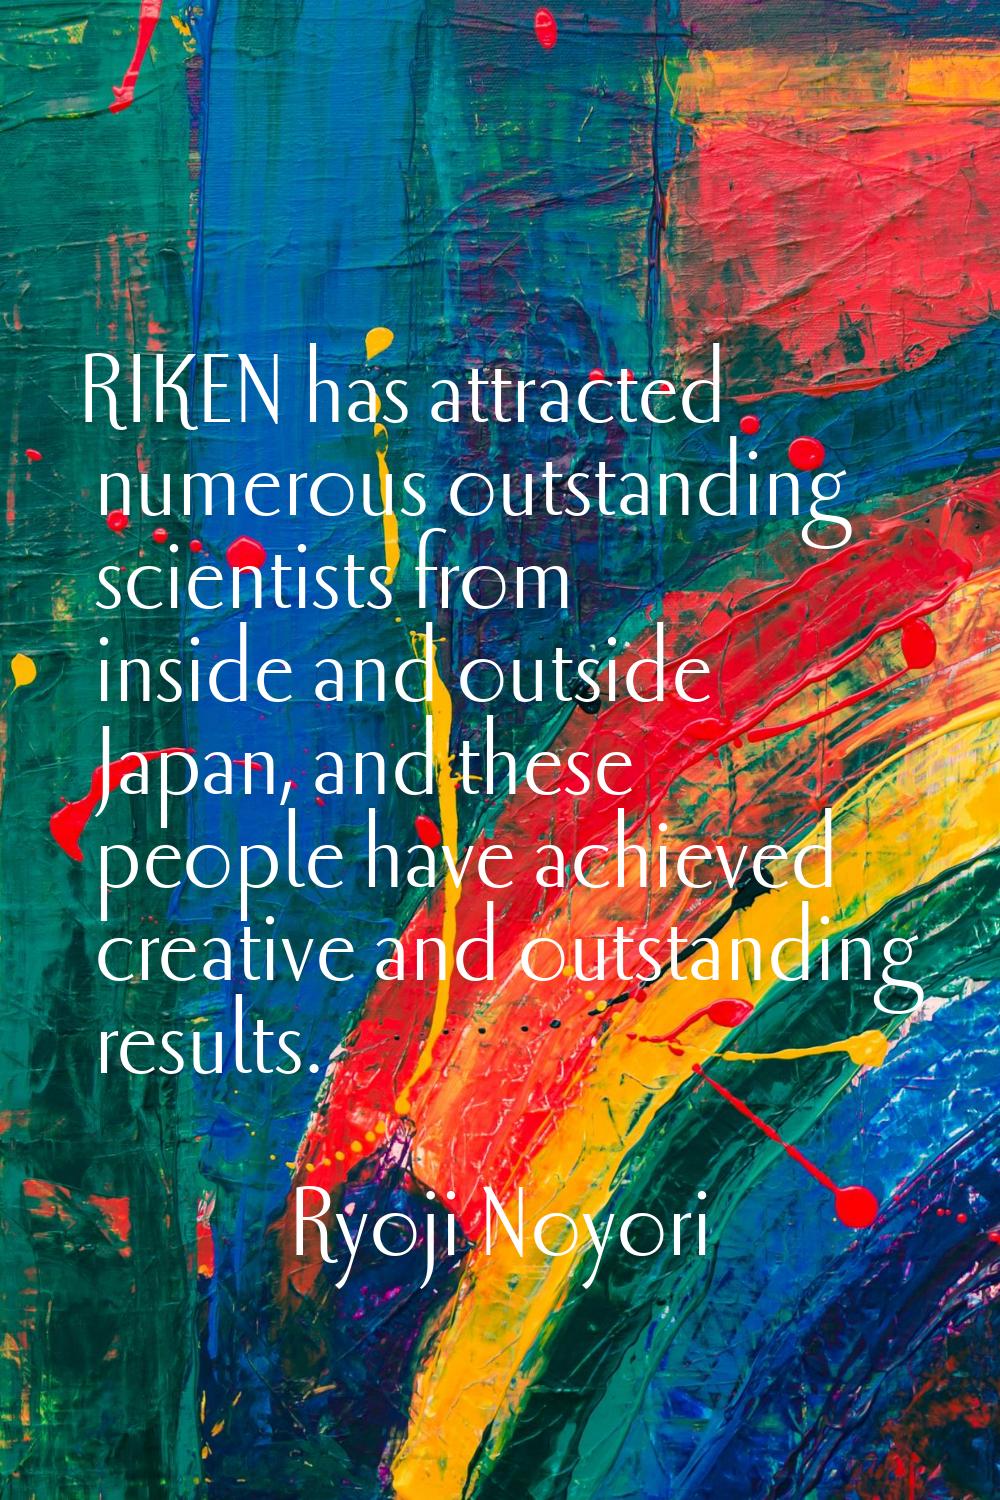 RIKEN has attracted numerous outstanding scientists from inside and outside Japan, and these people